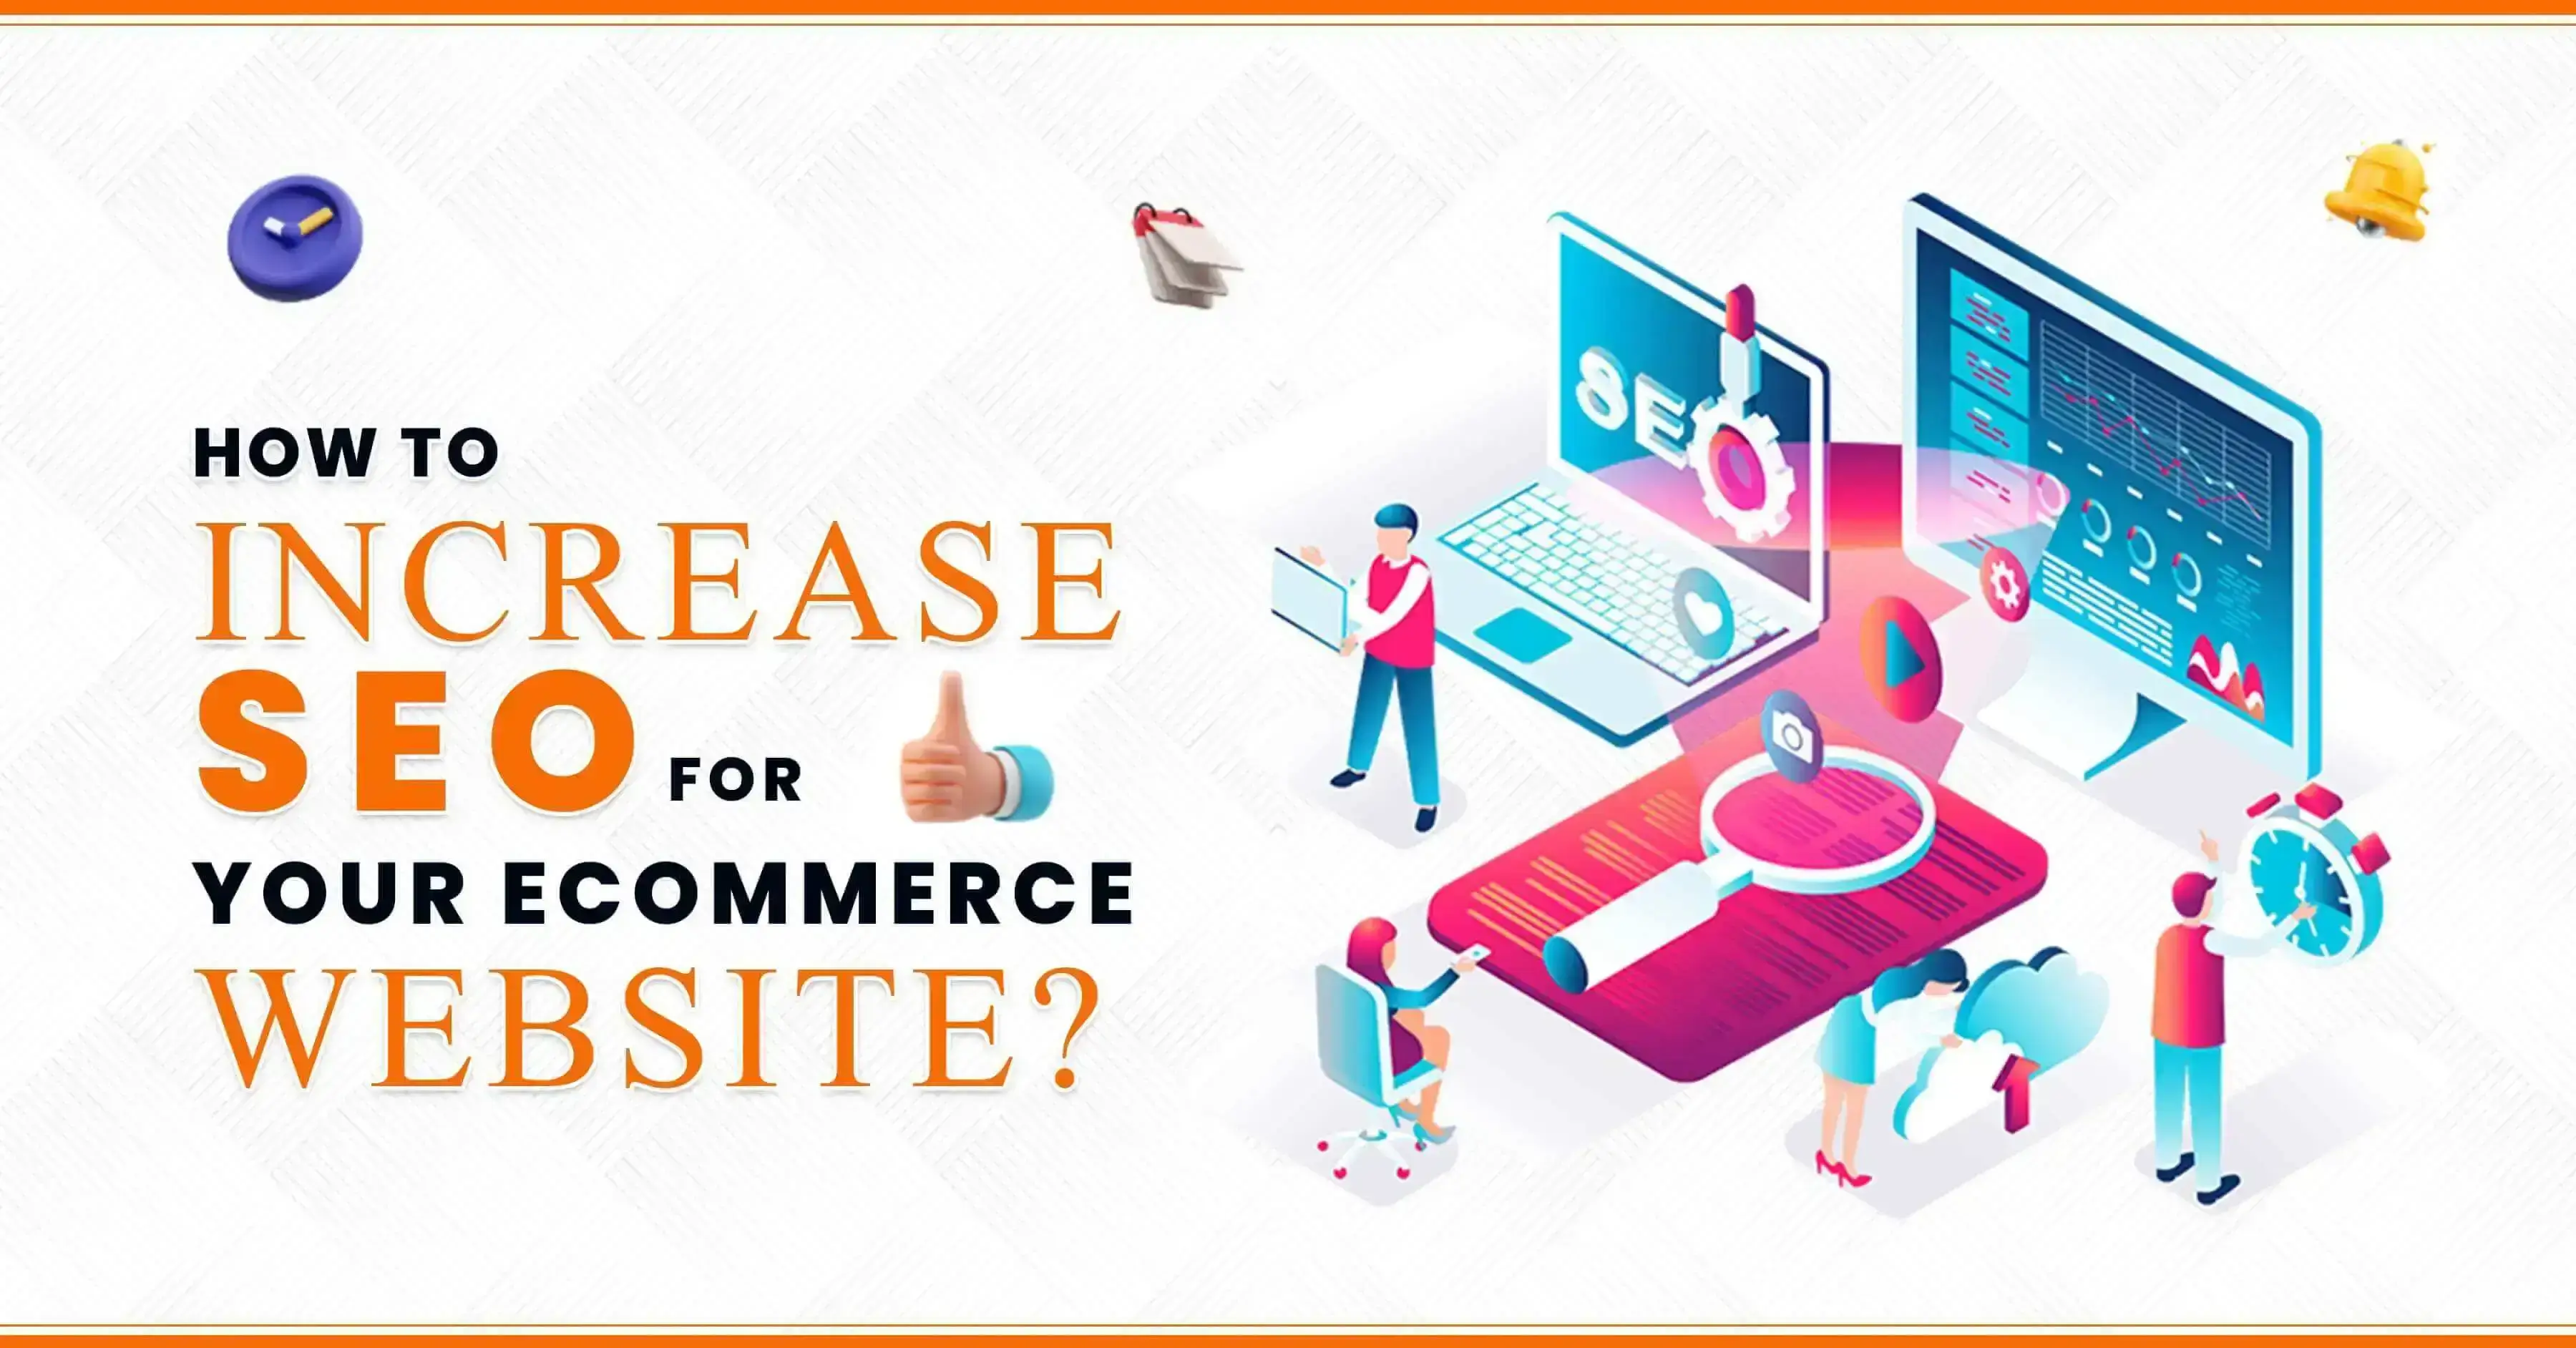 How to Increase SEO for your eCommerce website?